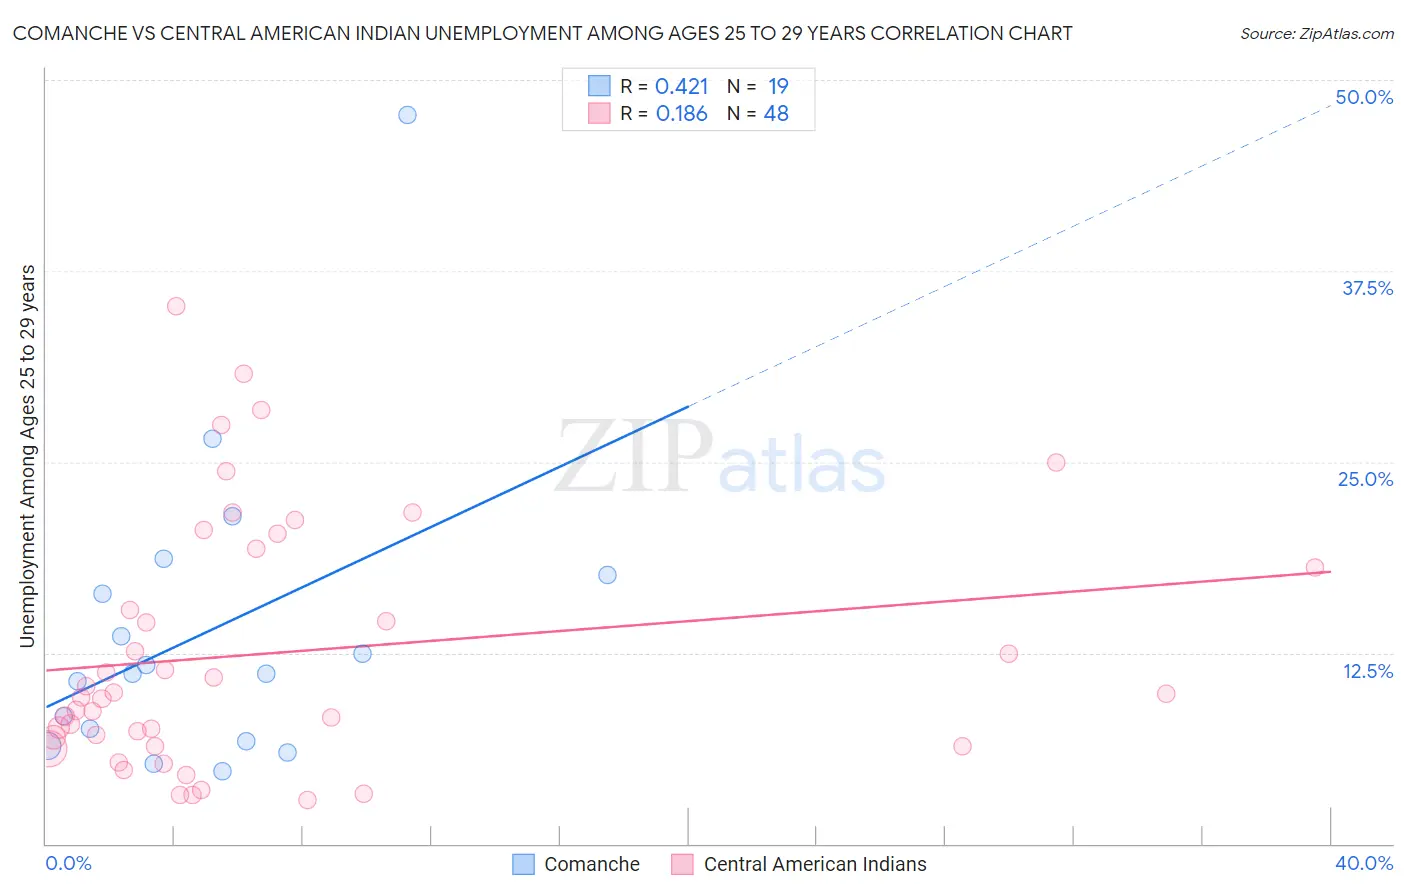 Comanche vs Central American Indian Unemployment Among Ages 25 to 29 years